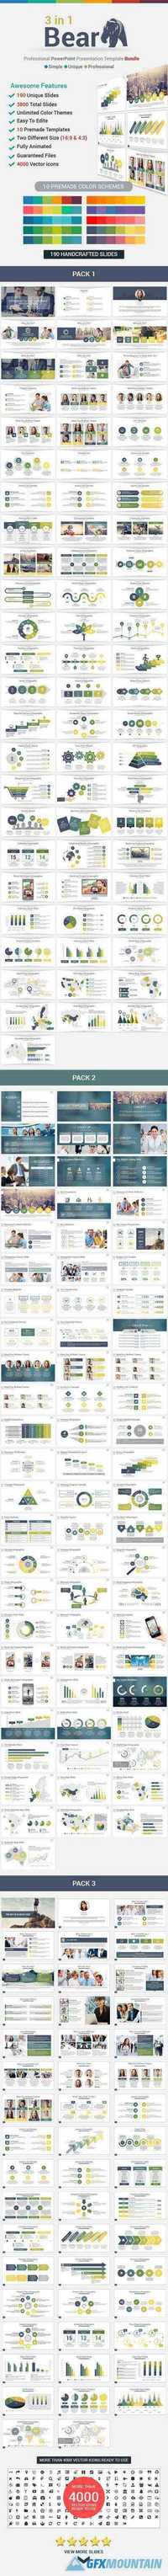 Graphicriver 3 in 1 Bear PowerPoint Template Bundle 13028387